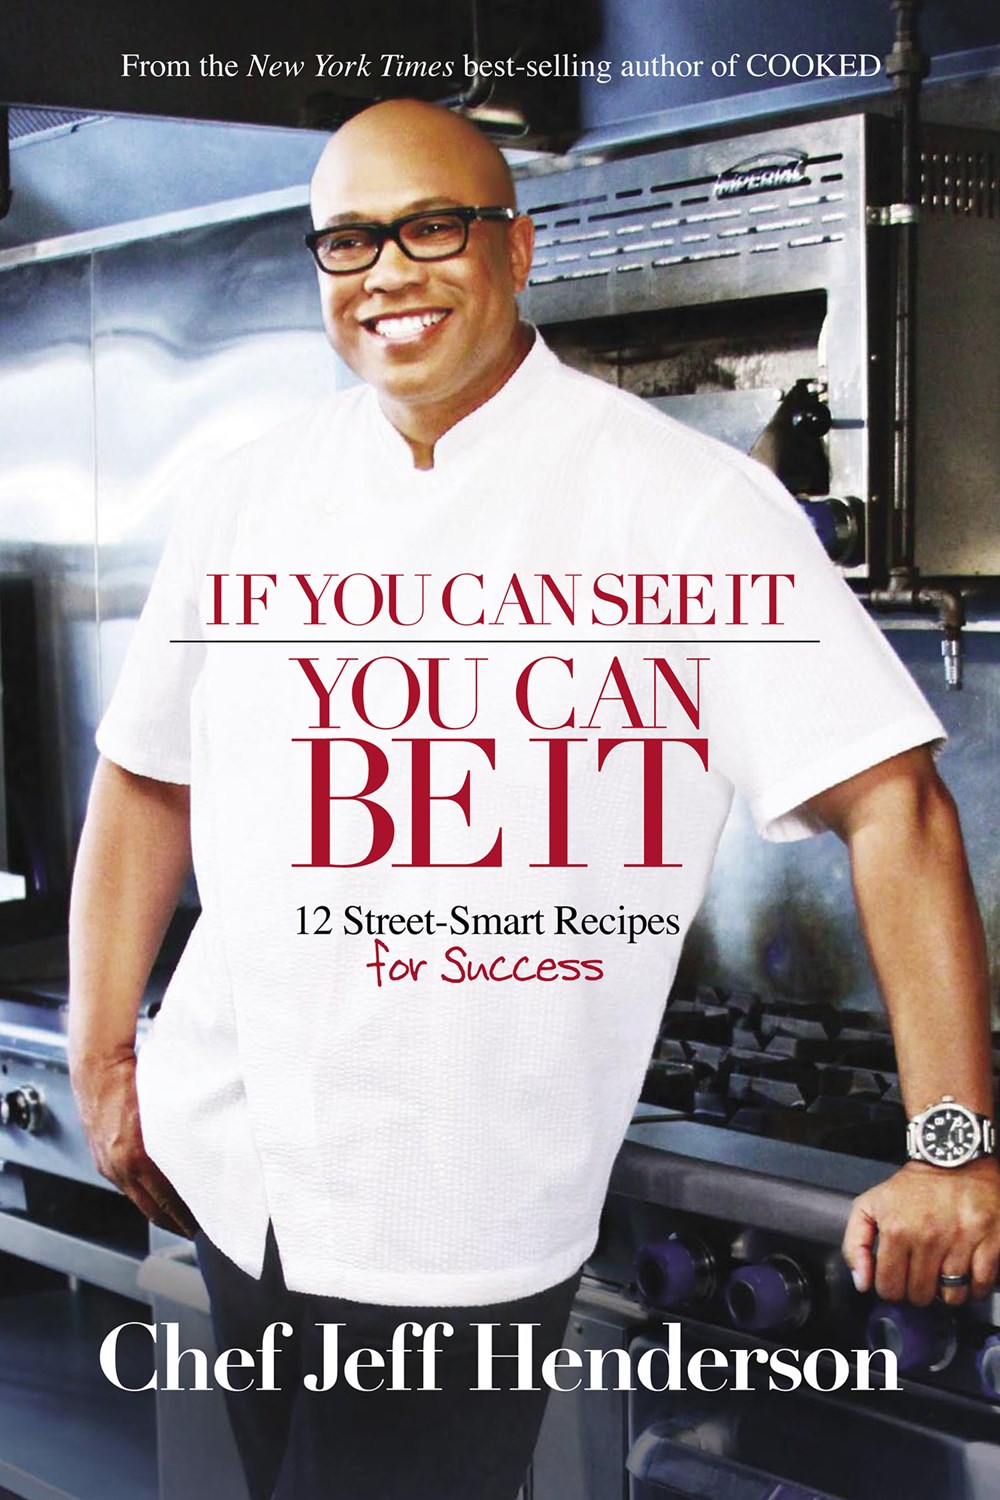 If You Can See It, You Can Be It: 12 Street-Smart Recipes for Success